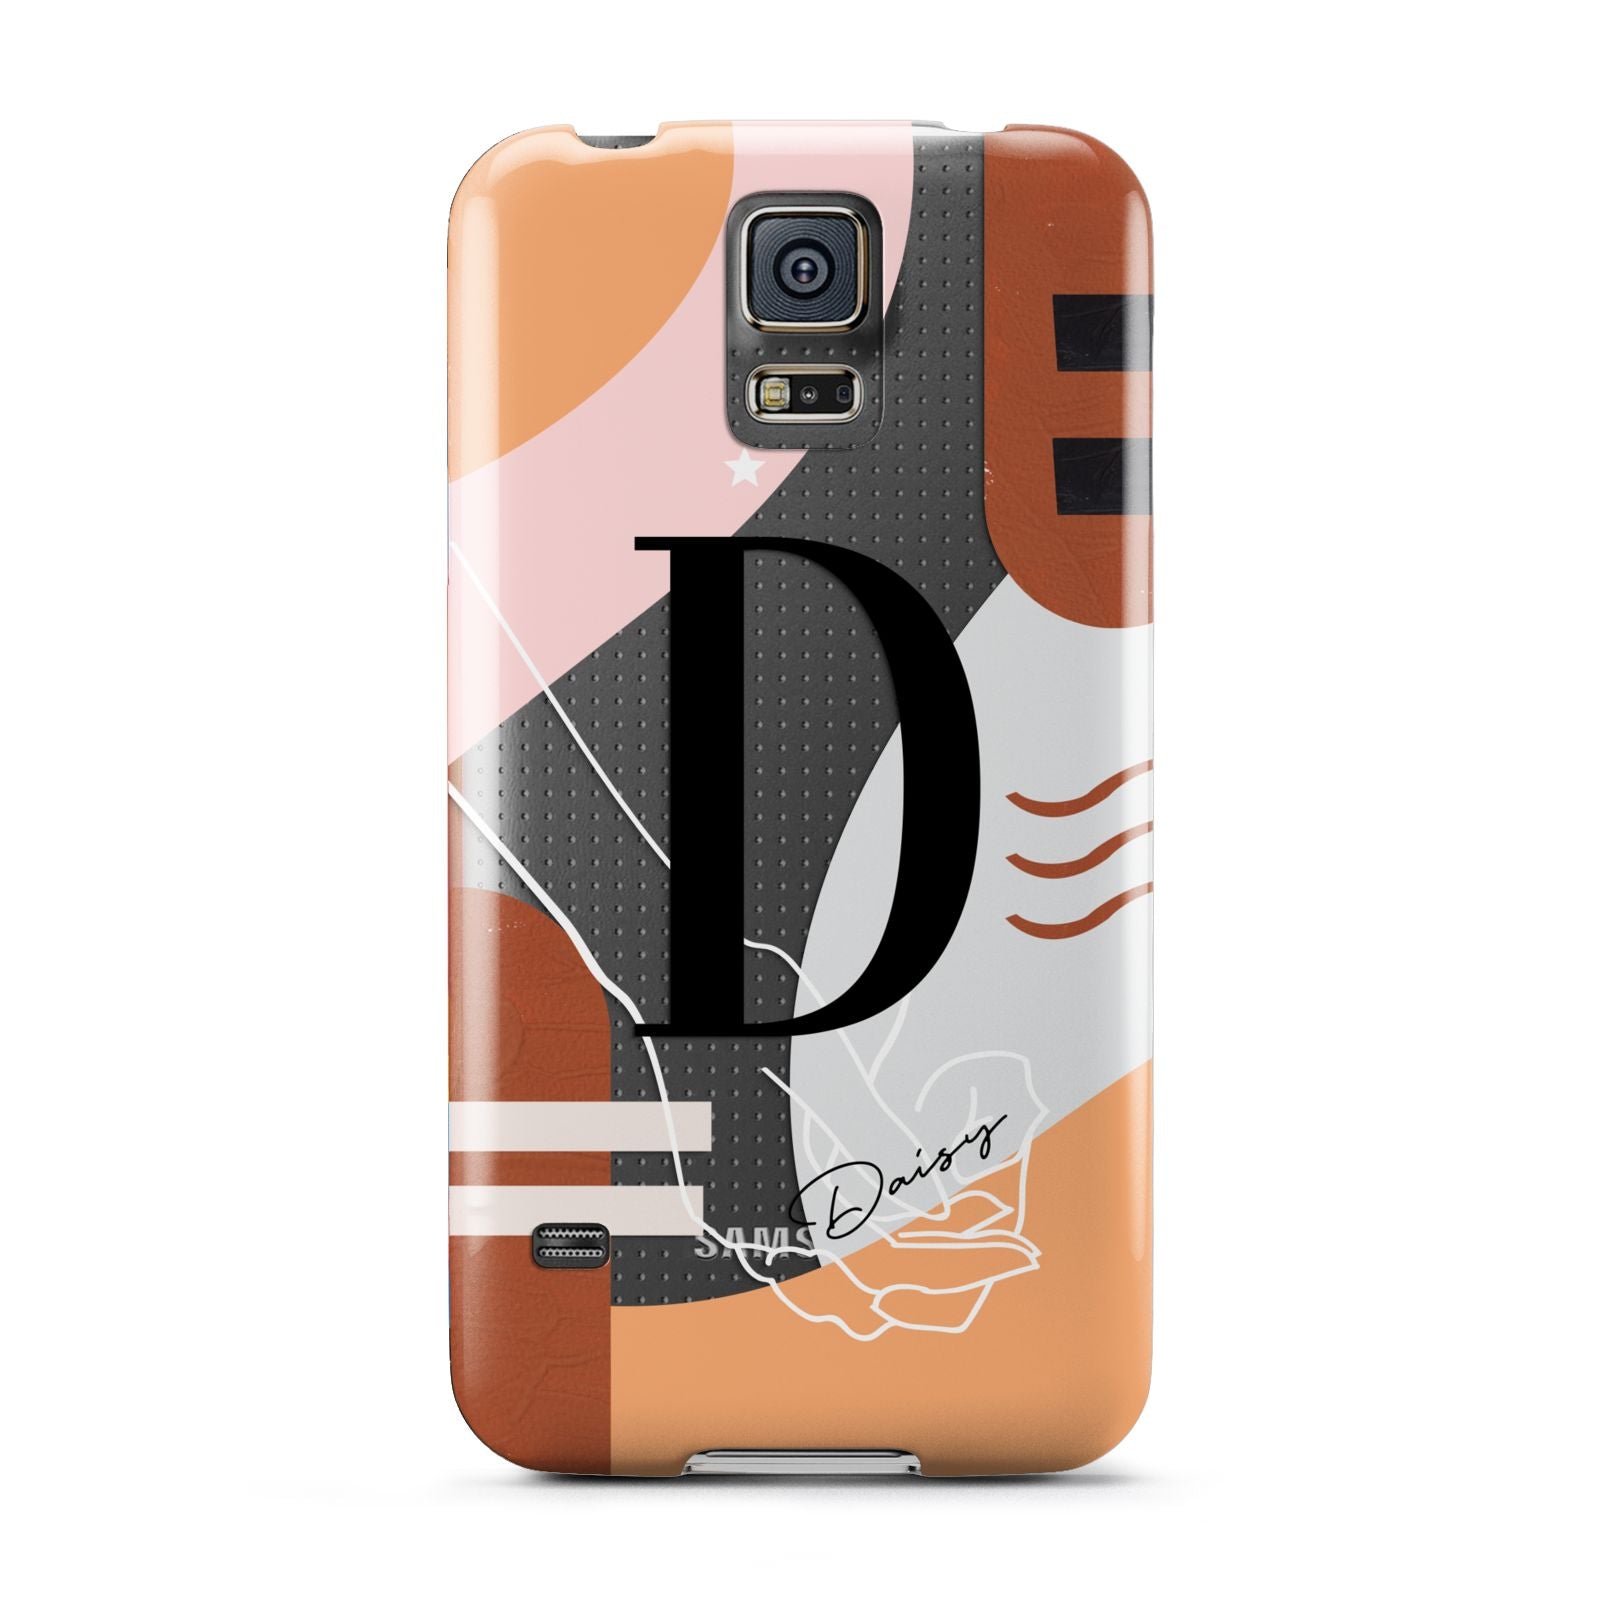 Personalised Abstract Samsung Galaxy S5 Case